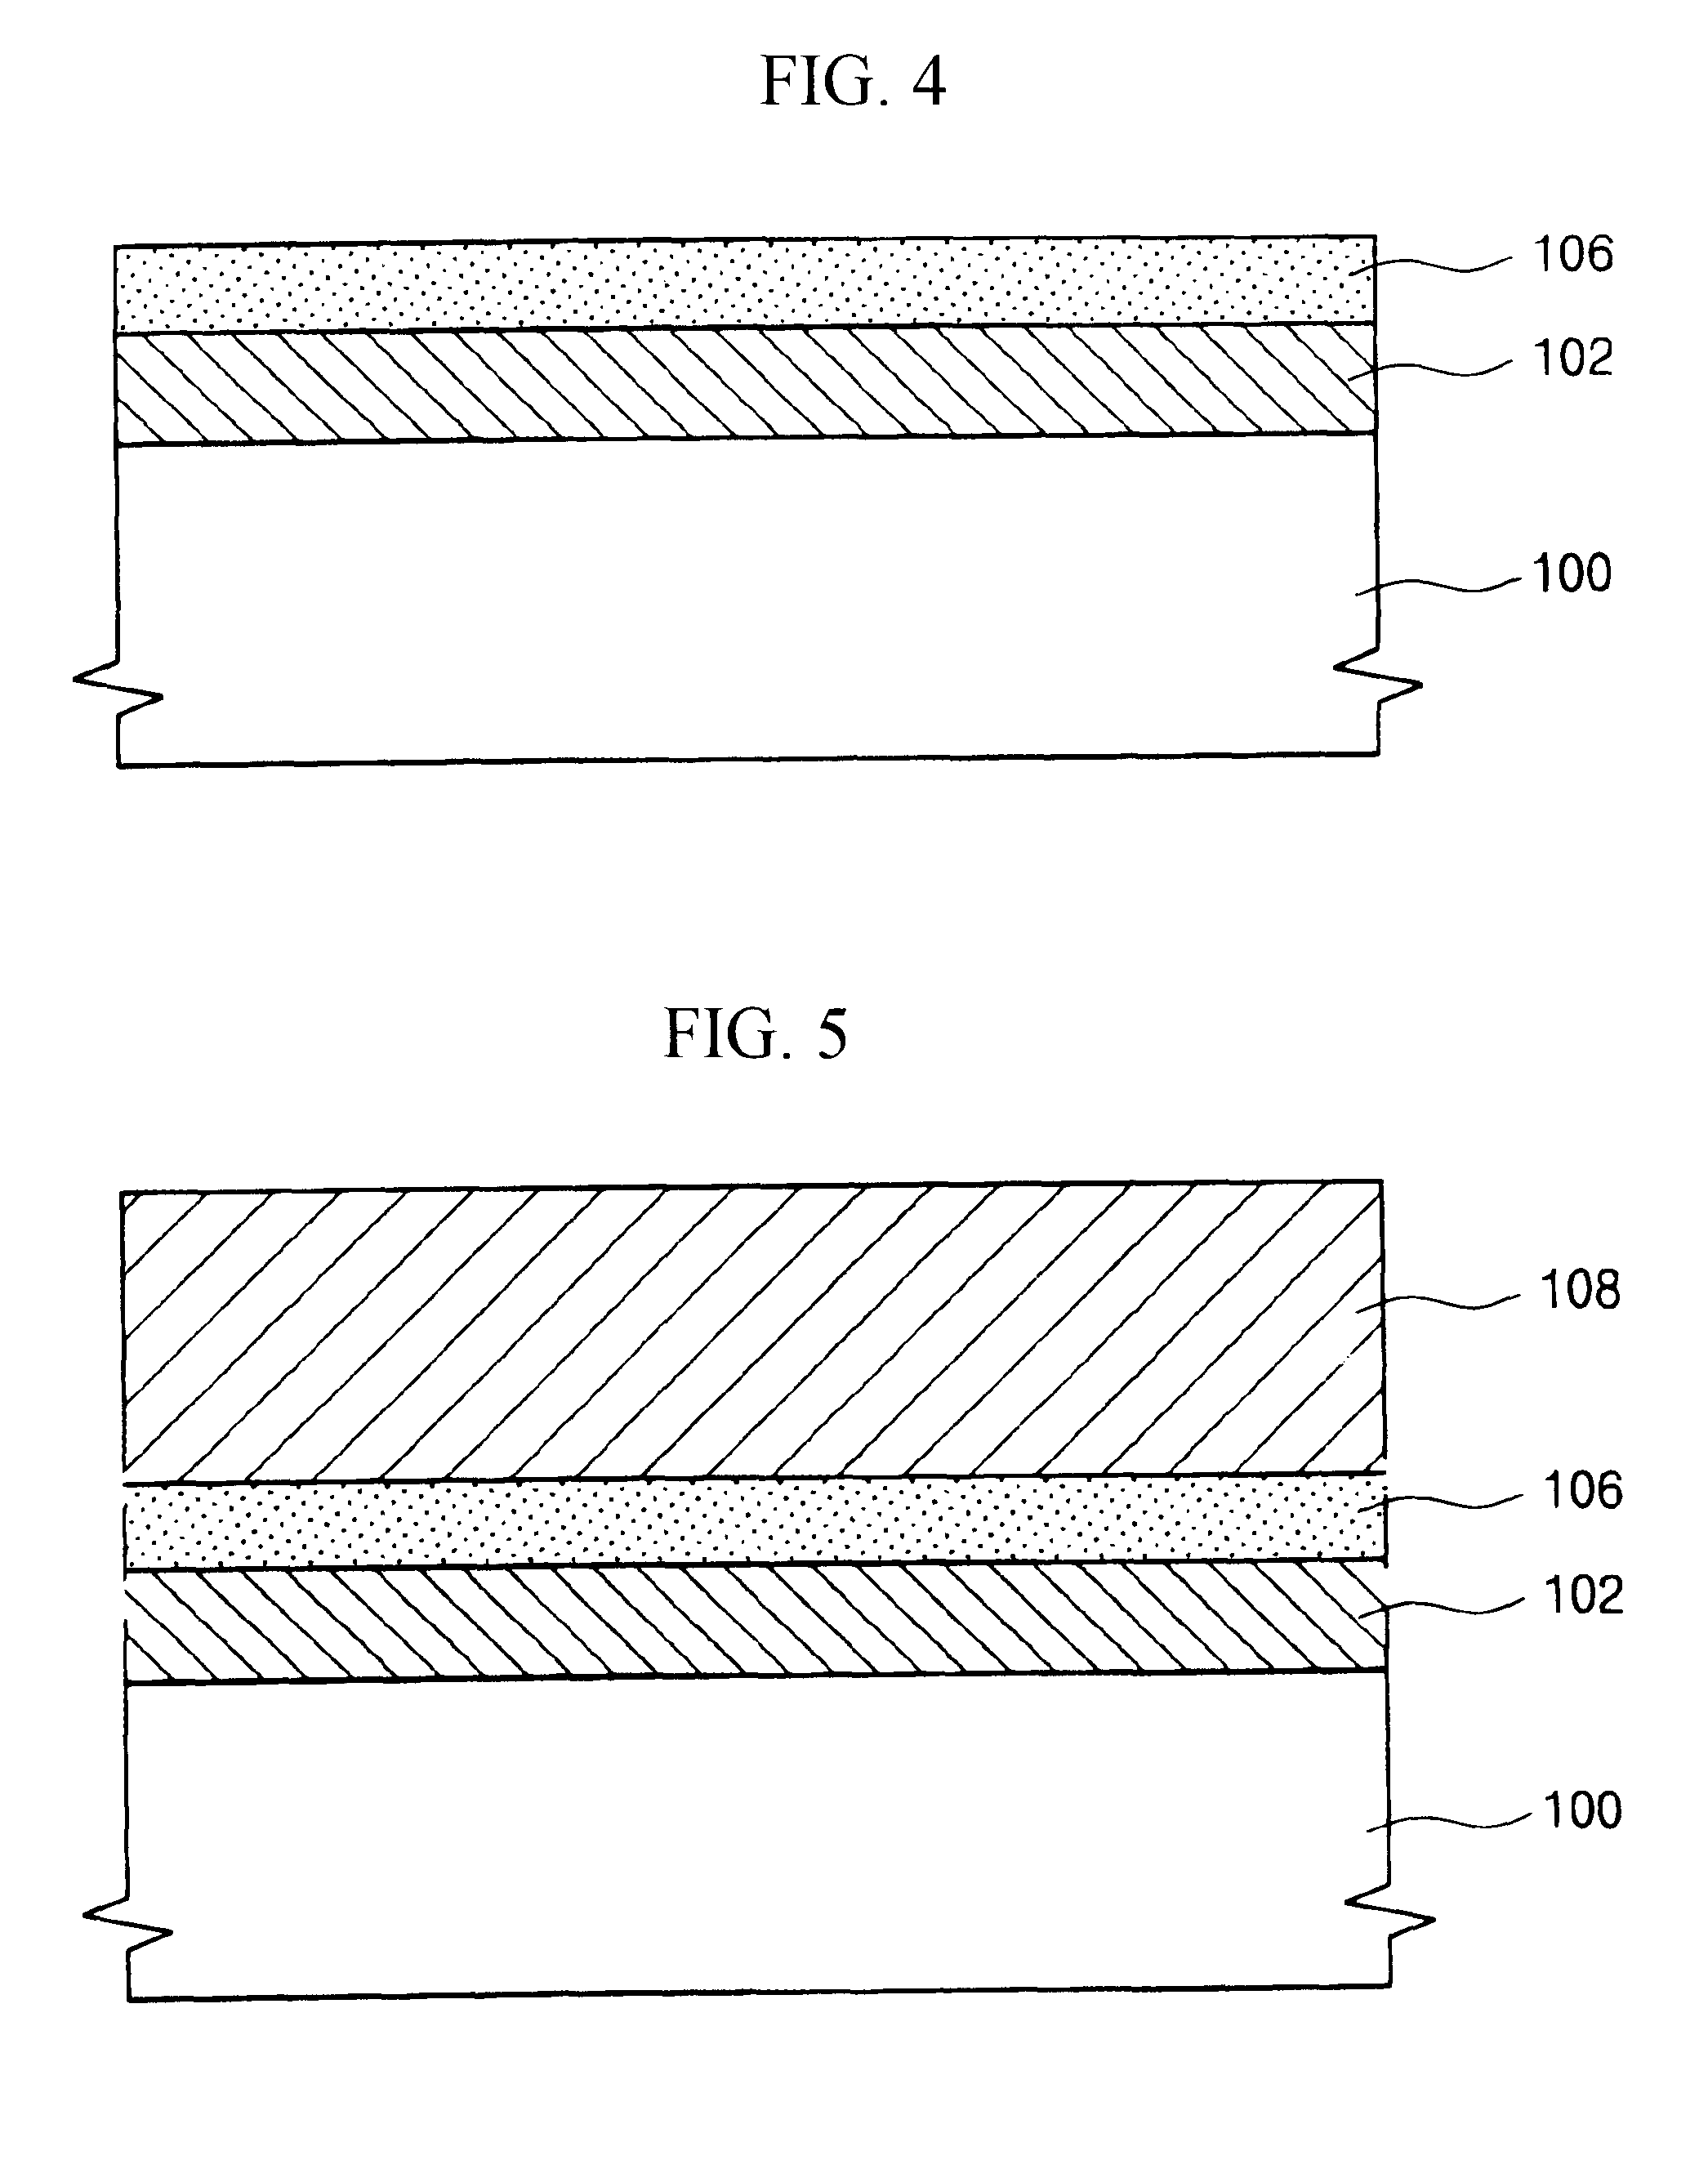 Method for forming a tantalum oxide capacitor